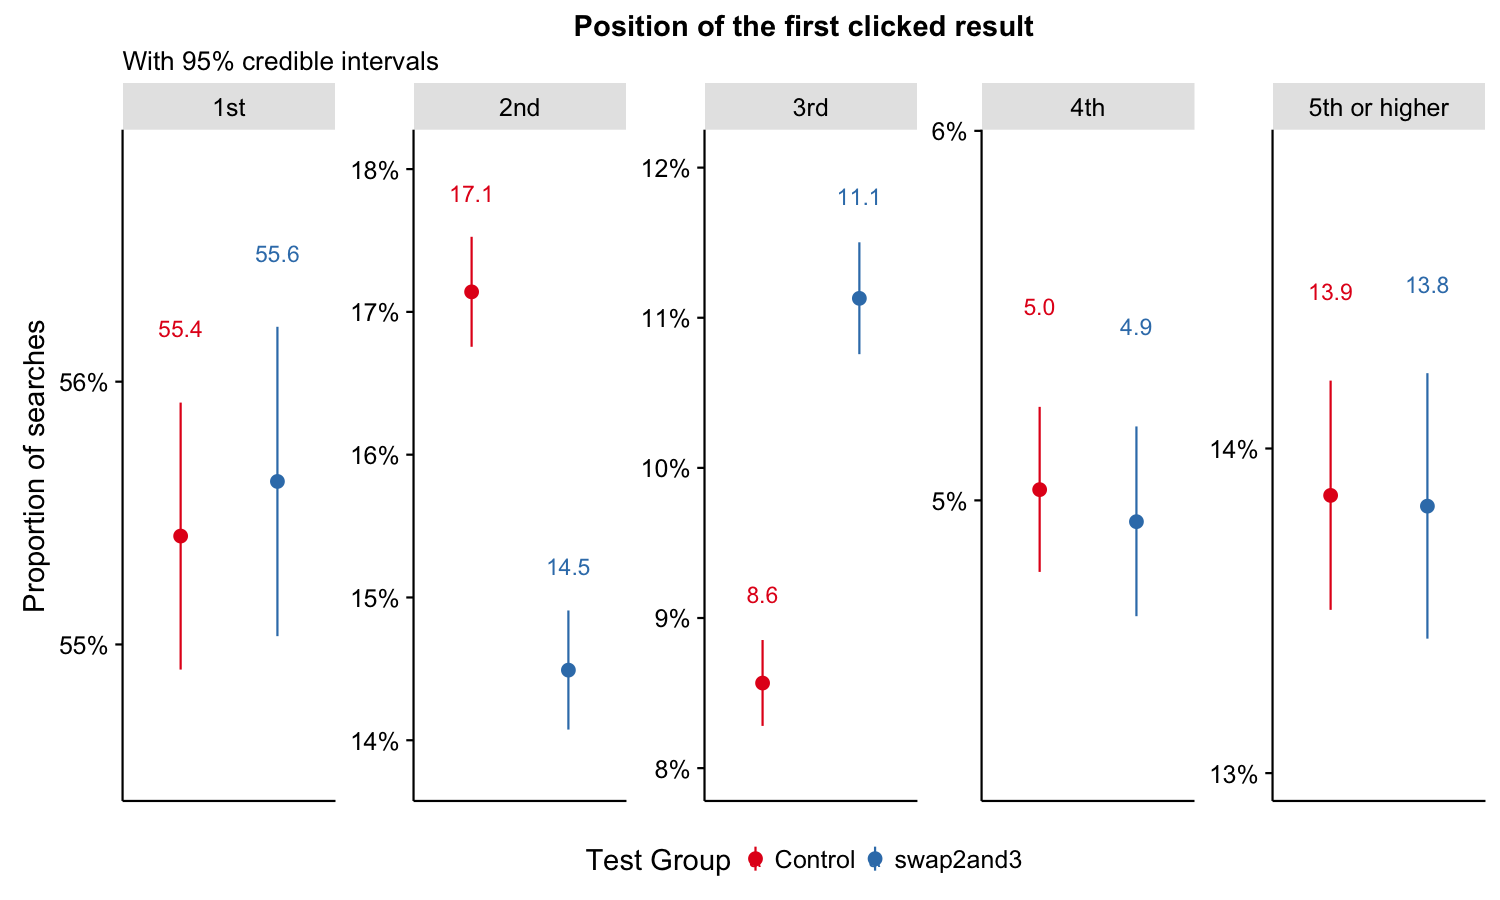 **Figure 3**: Proportion of searches that clicked a result first by position and group.